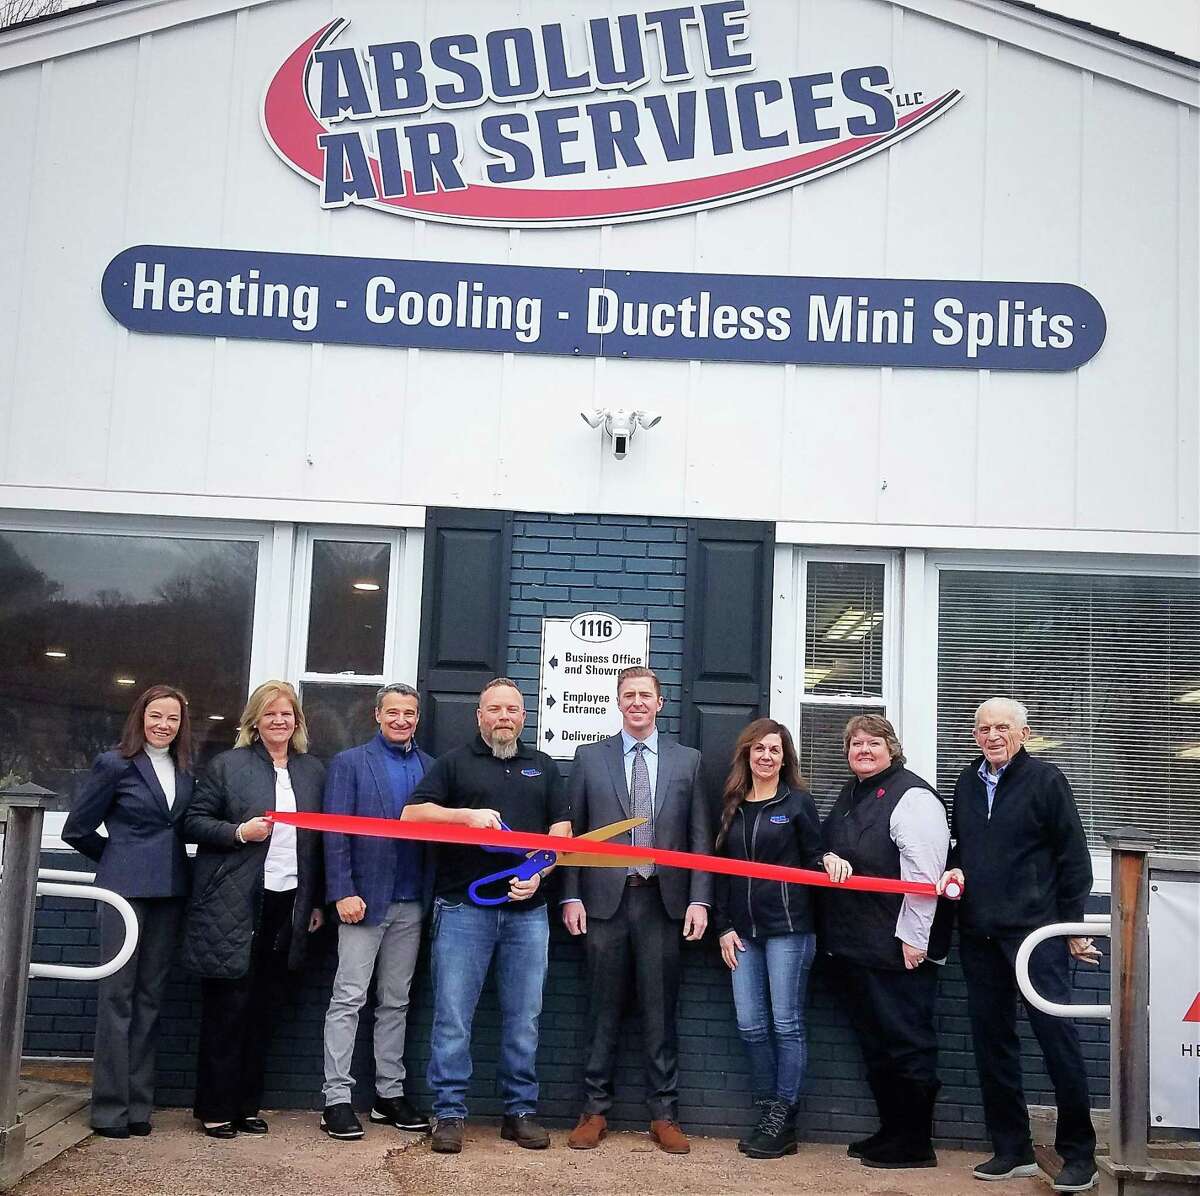 Absolute Air Services in Portland held a grand opening for its new showroom Wednesday. From left are Middlesex County Chamber of Commerce Vice President Johanna Bond, state Rep. Irene Haines, Economic Development Commission Chairman Mike Nadolski, owner Steve Graff, First Selectman Ryan Curley, owner Bonnie Graff, chamber East Hampton Division Chairwoman Catherine Egan and Chamber President Larry McHugh.